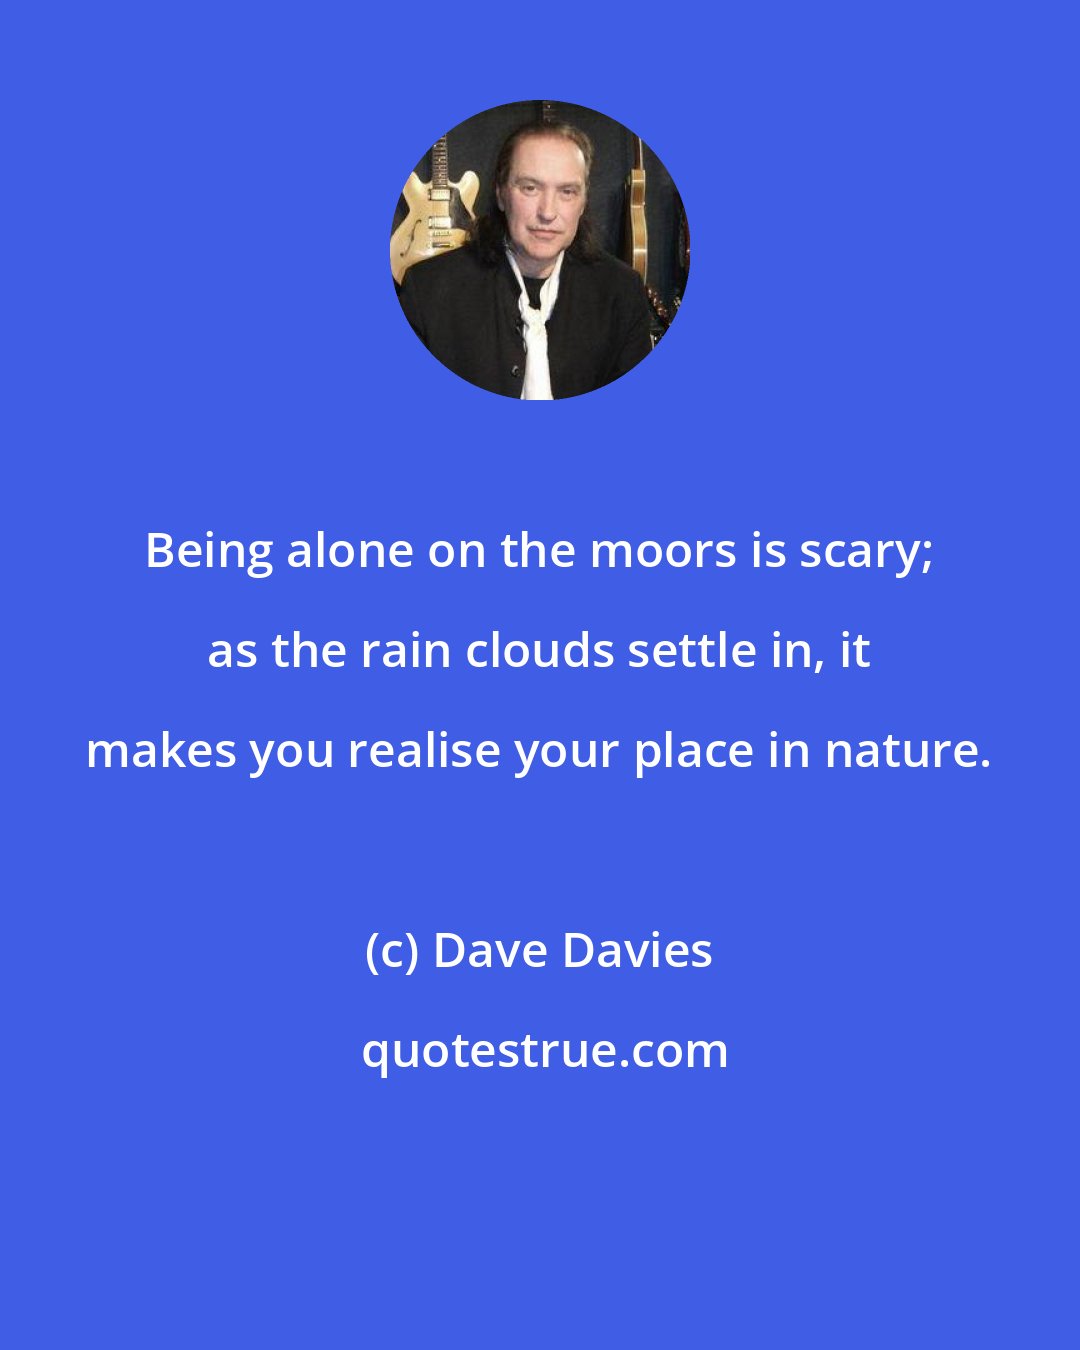 Dave Davies: Being alone on the moors is scary; as the rain clouds settle in, it makes you realise your place in nature.